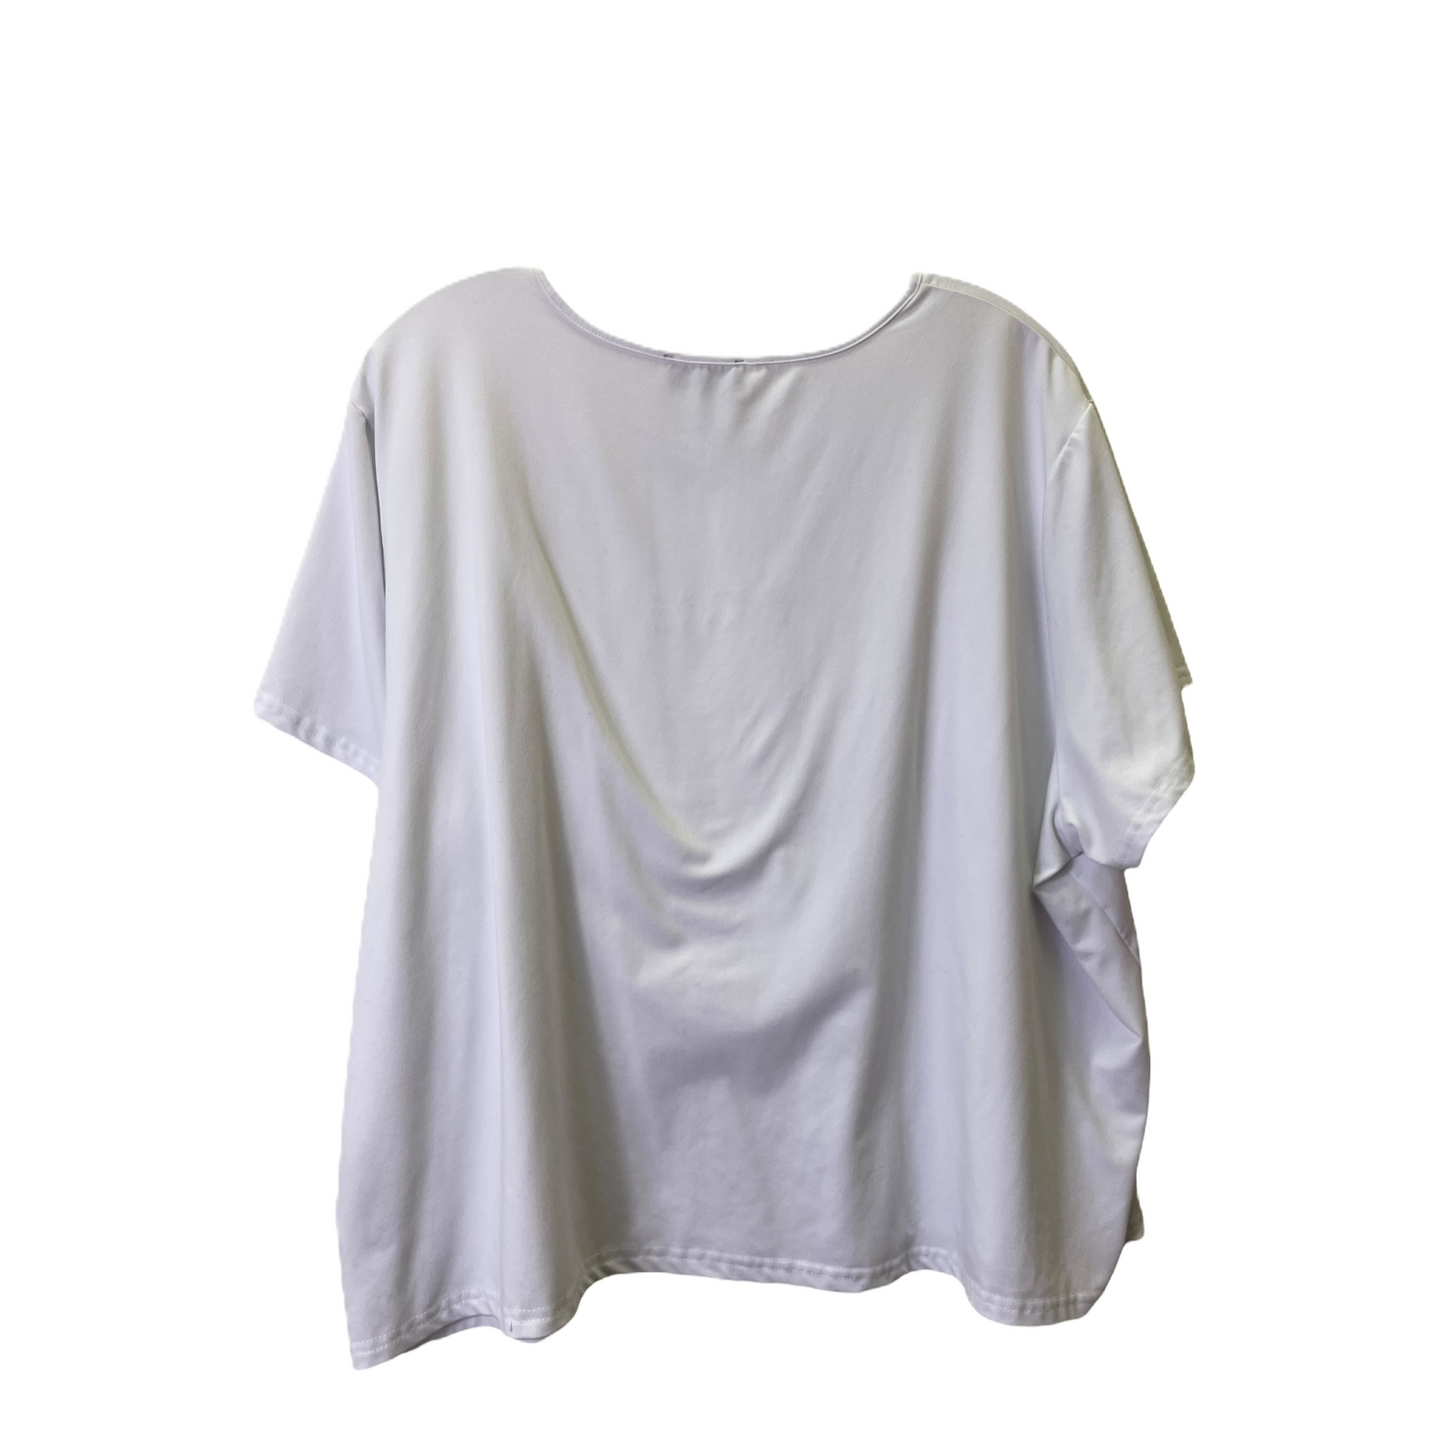 White Top Short Sleeve By Bebe, Size: 2x